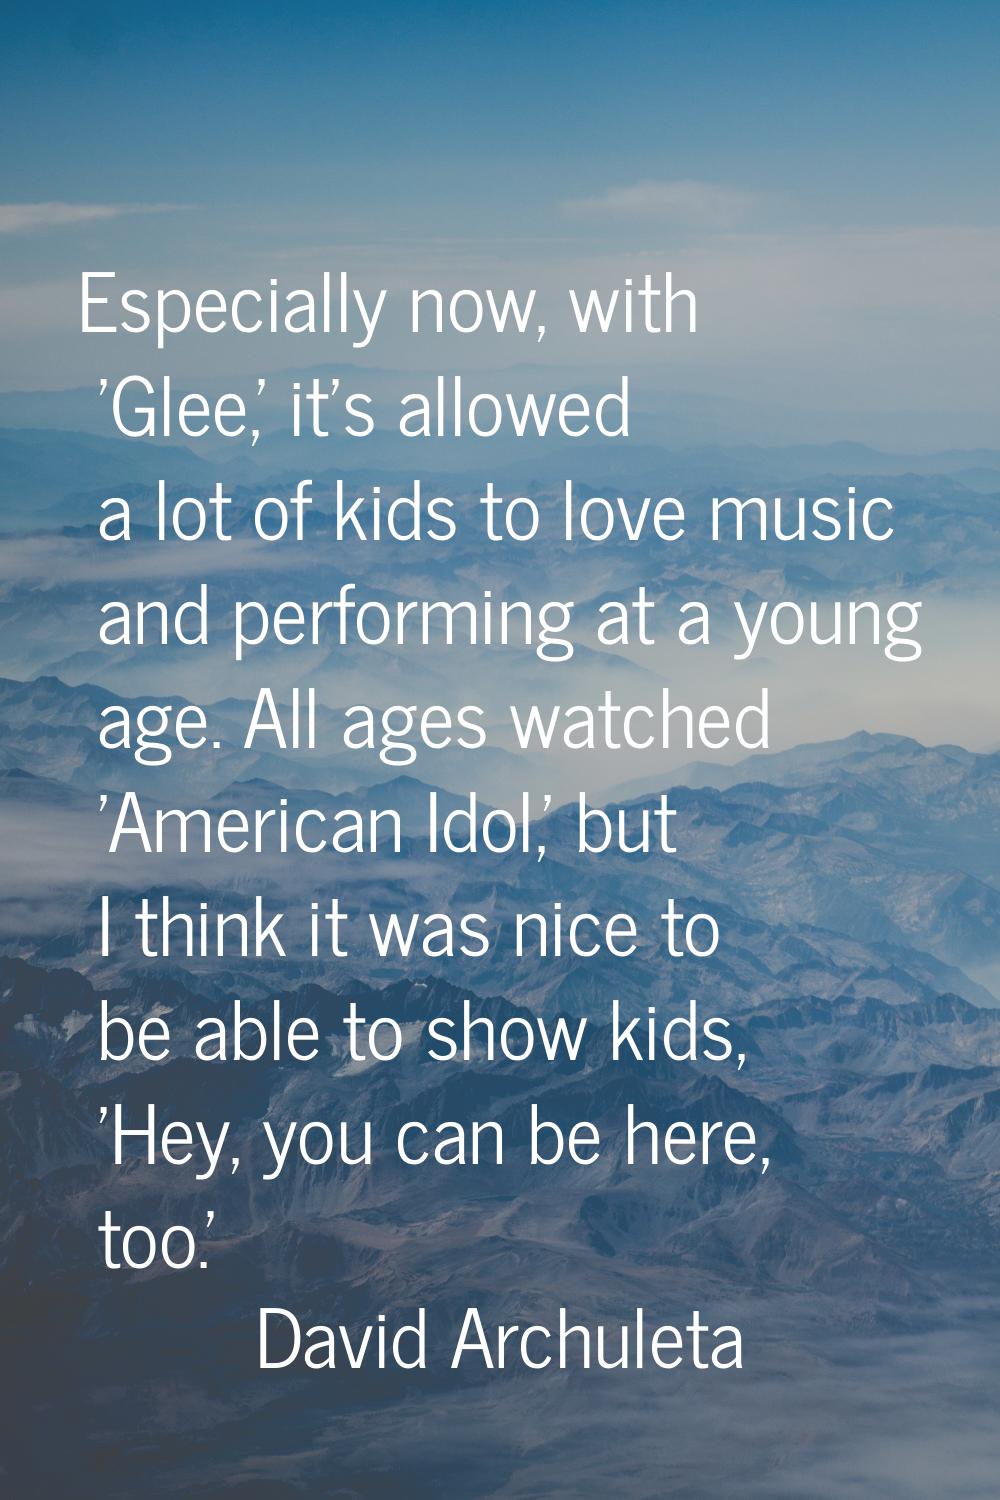 Especially now, with 'Glee,' it's allowed a lot of kids to love music and performing at a young age